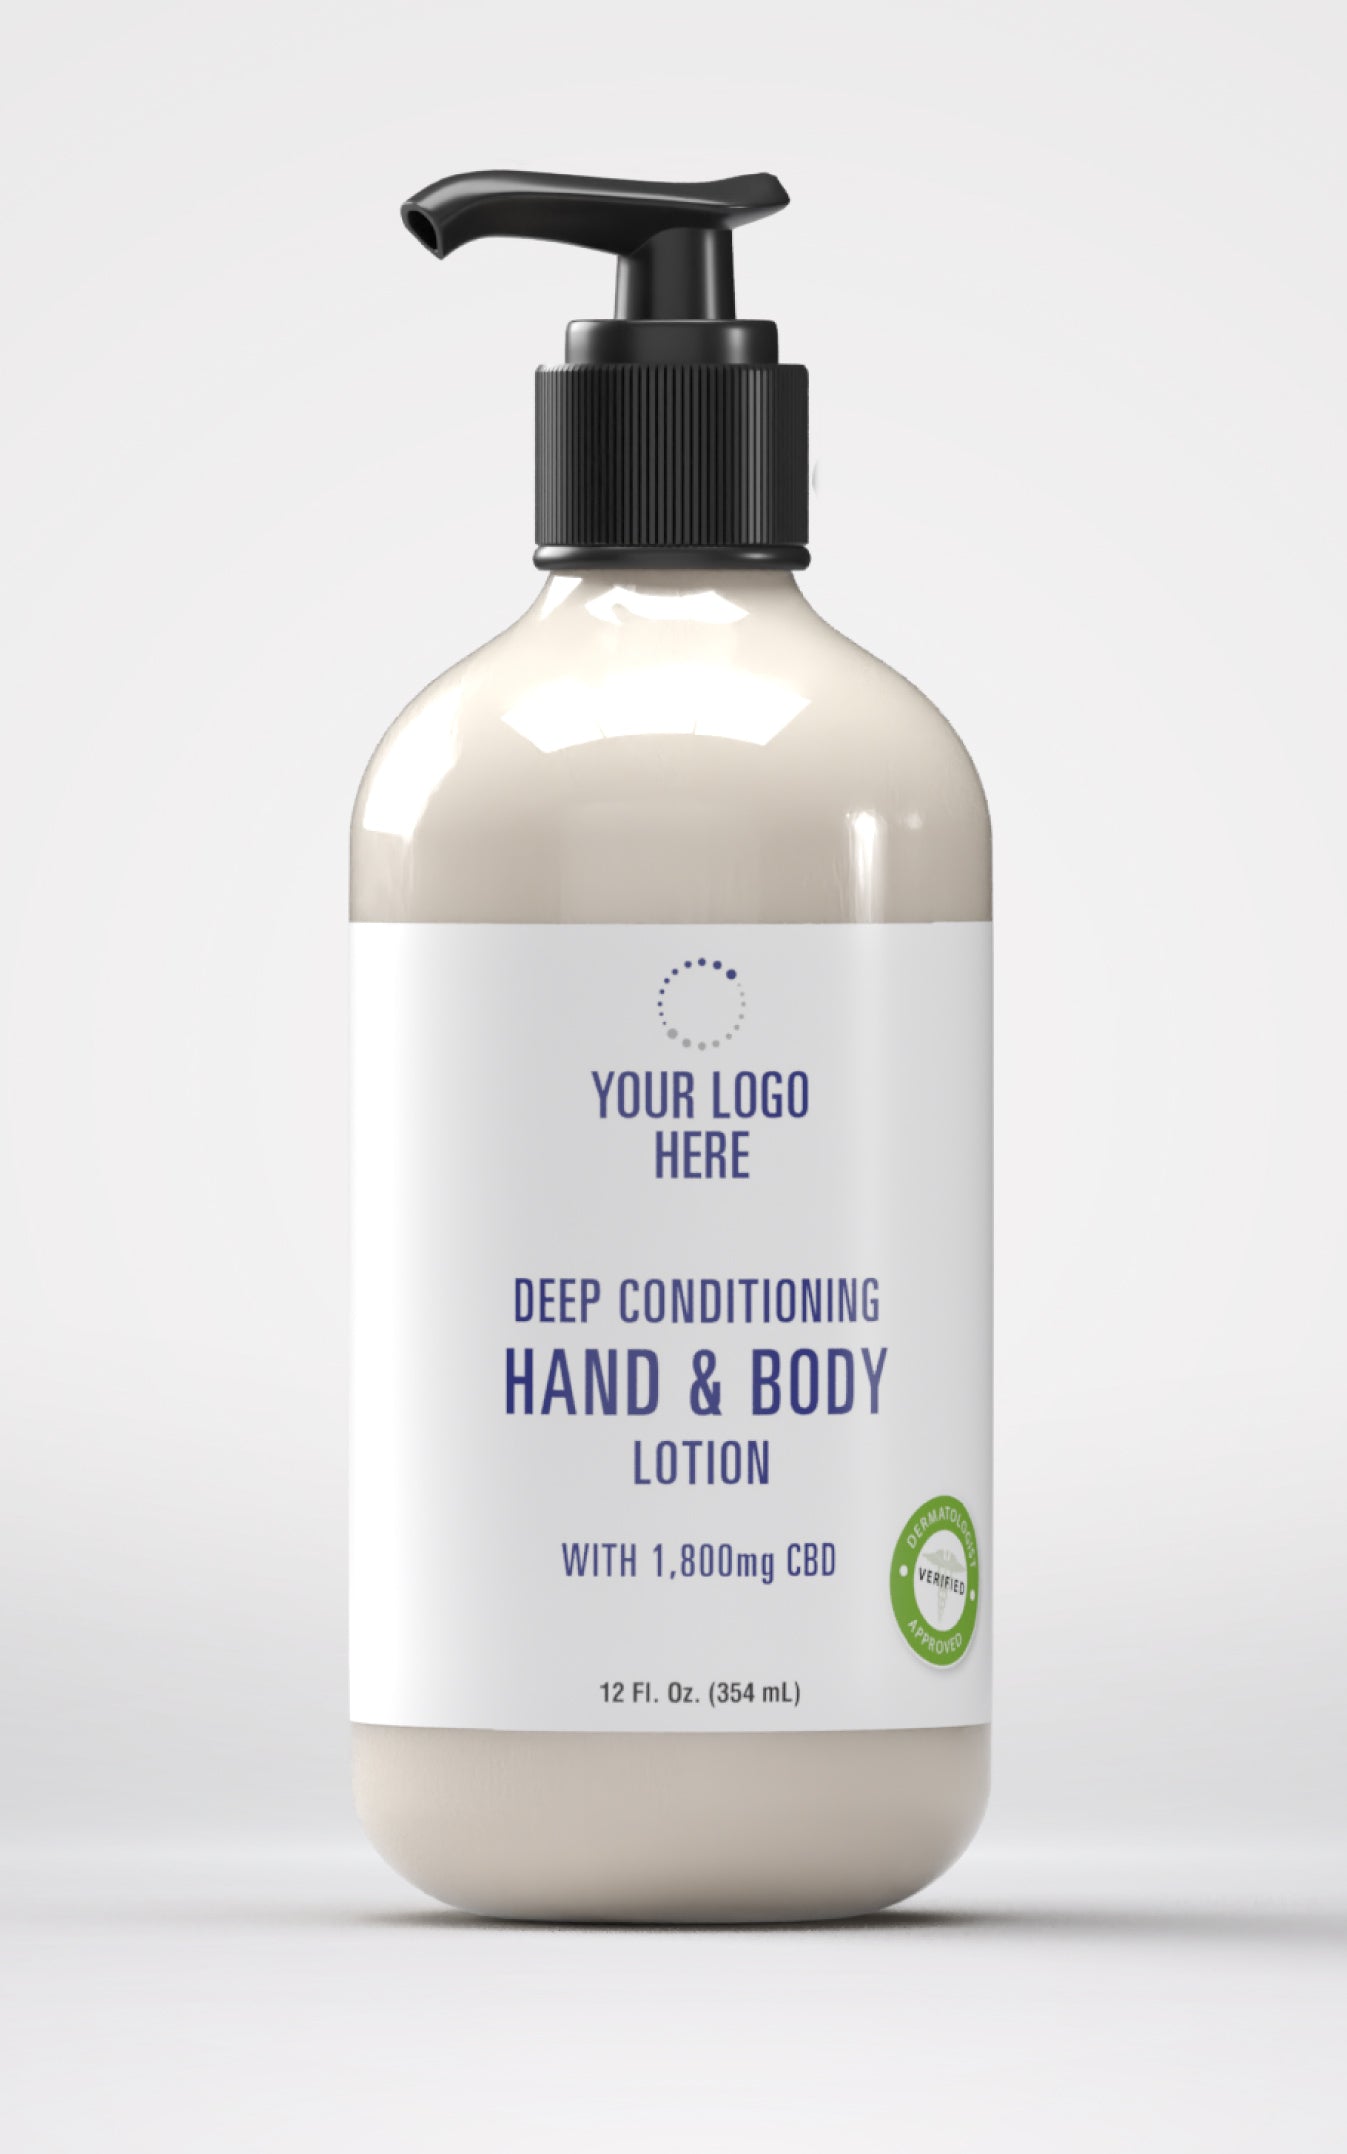 Deep Conditioning Hand & Body Lotion with 1,800mg CBD